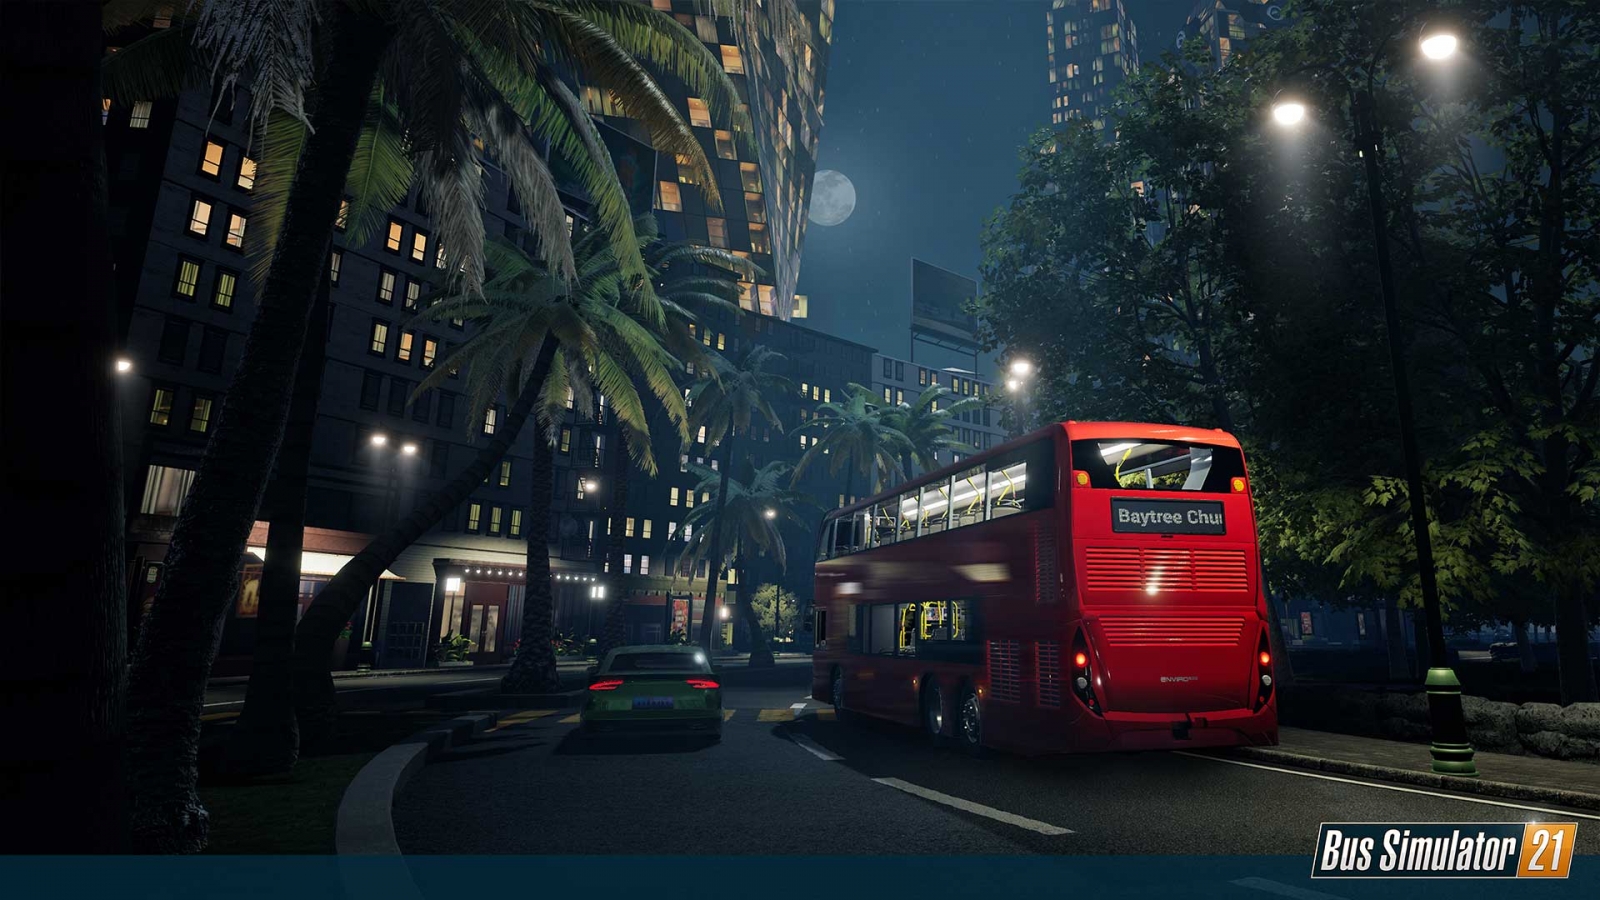 Bus 21 is available on PC, Xbox One, and PS4, launch trailer released - GAMING TREND